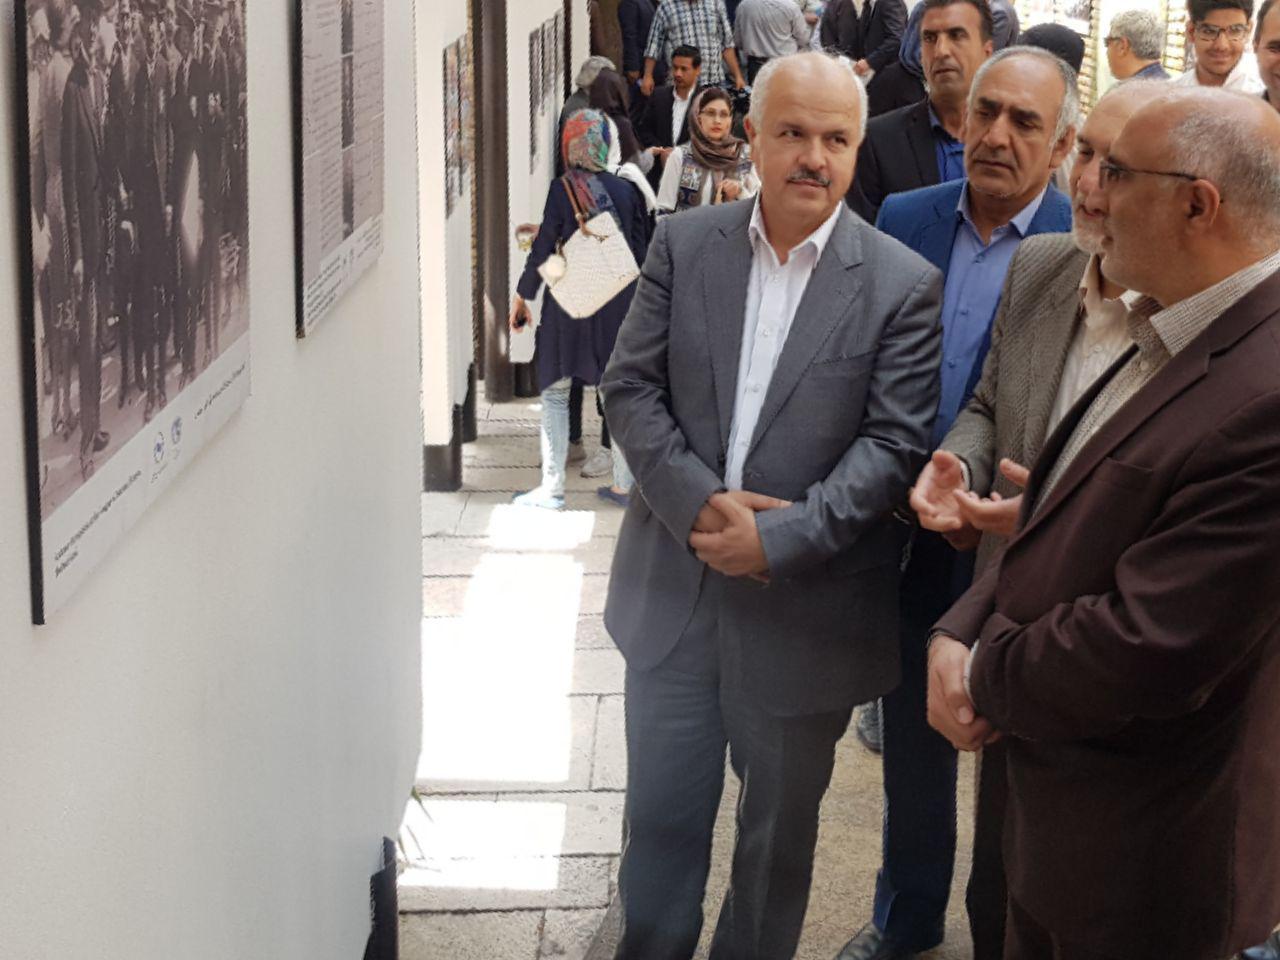 exhibition-of-un-iran-historical-photos-and-documents-opens-in-shiraz